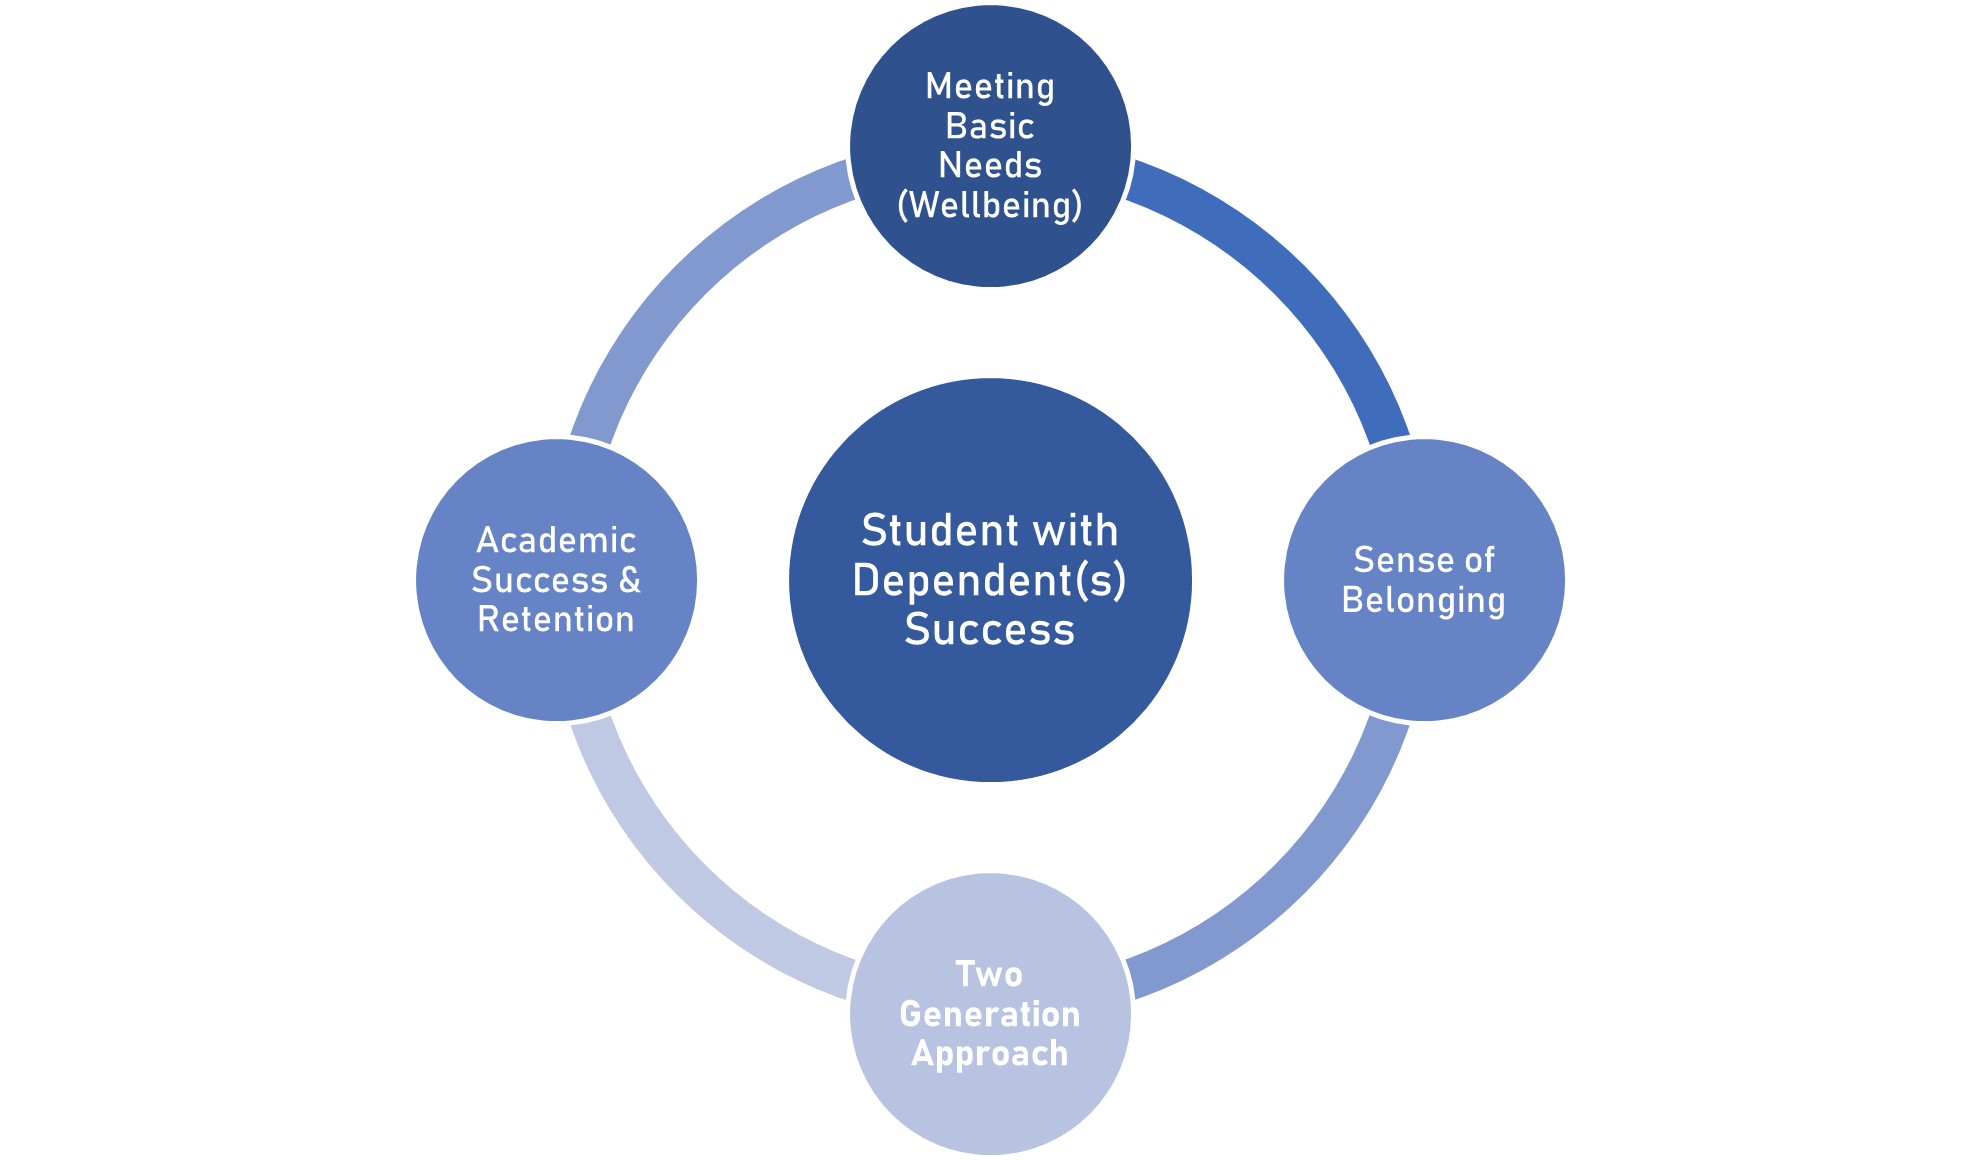 Student with Dependent Model: Meeting Basic Needs (wellbeing), sense of belonging, 2Gen approach, academic success and retention